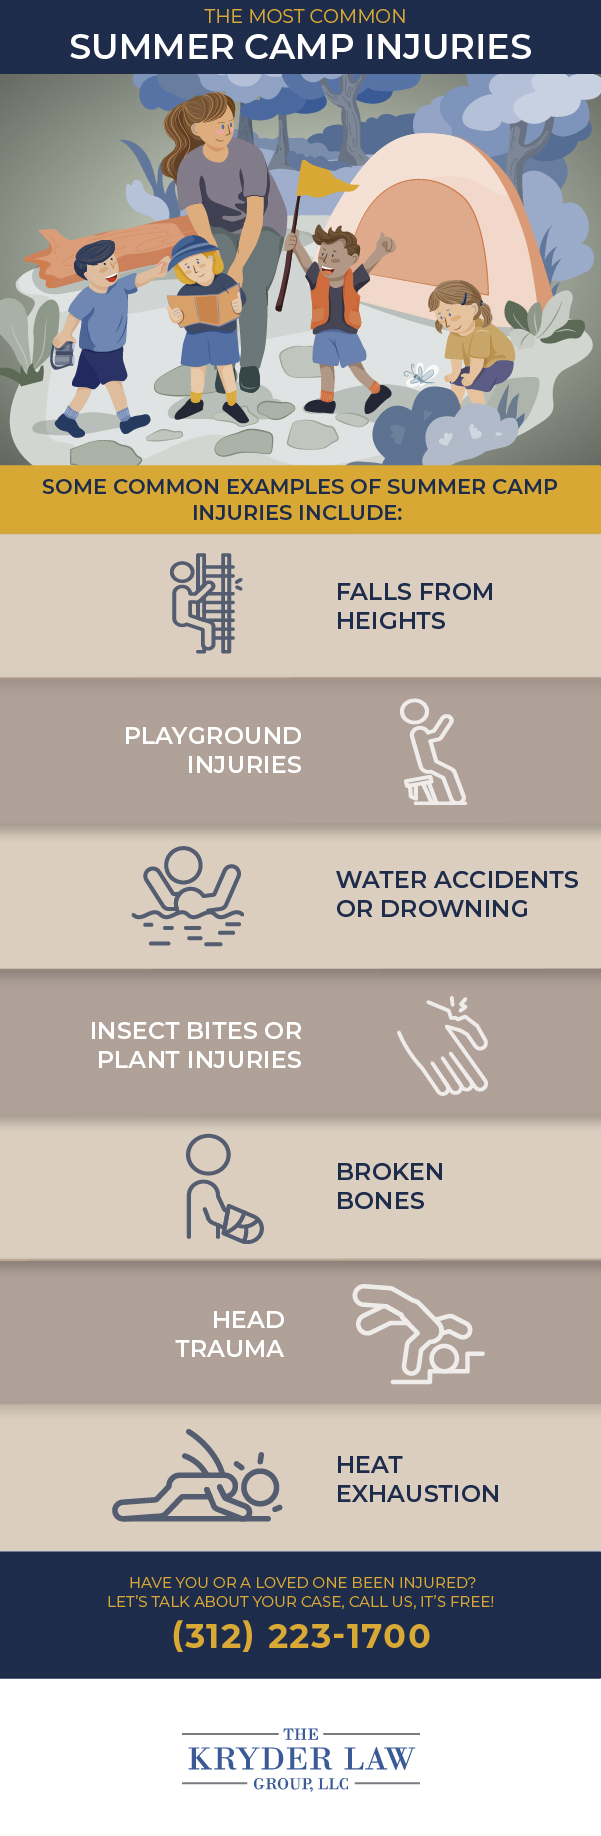 The Most Common Summer Camp Injuries Infographic